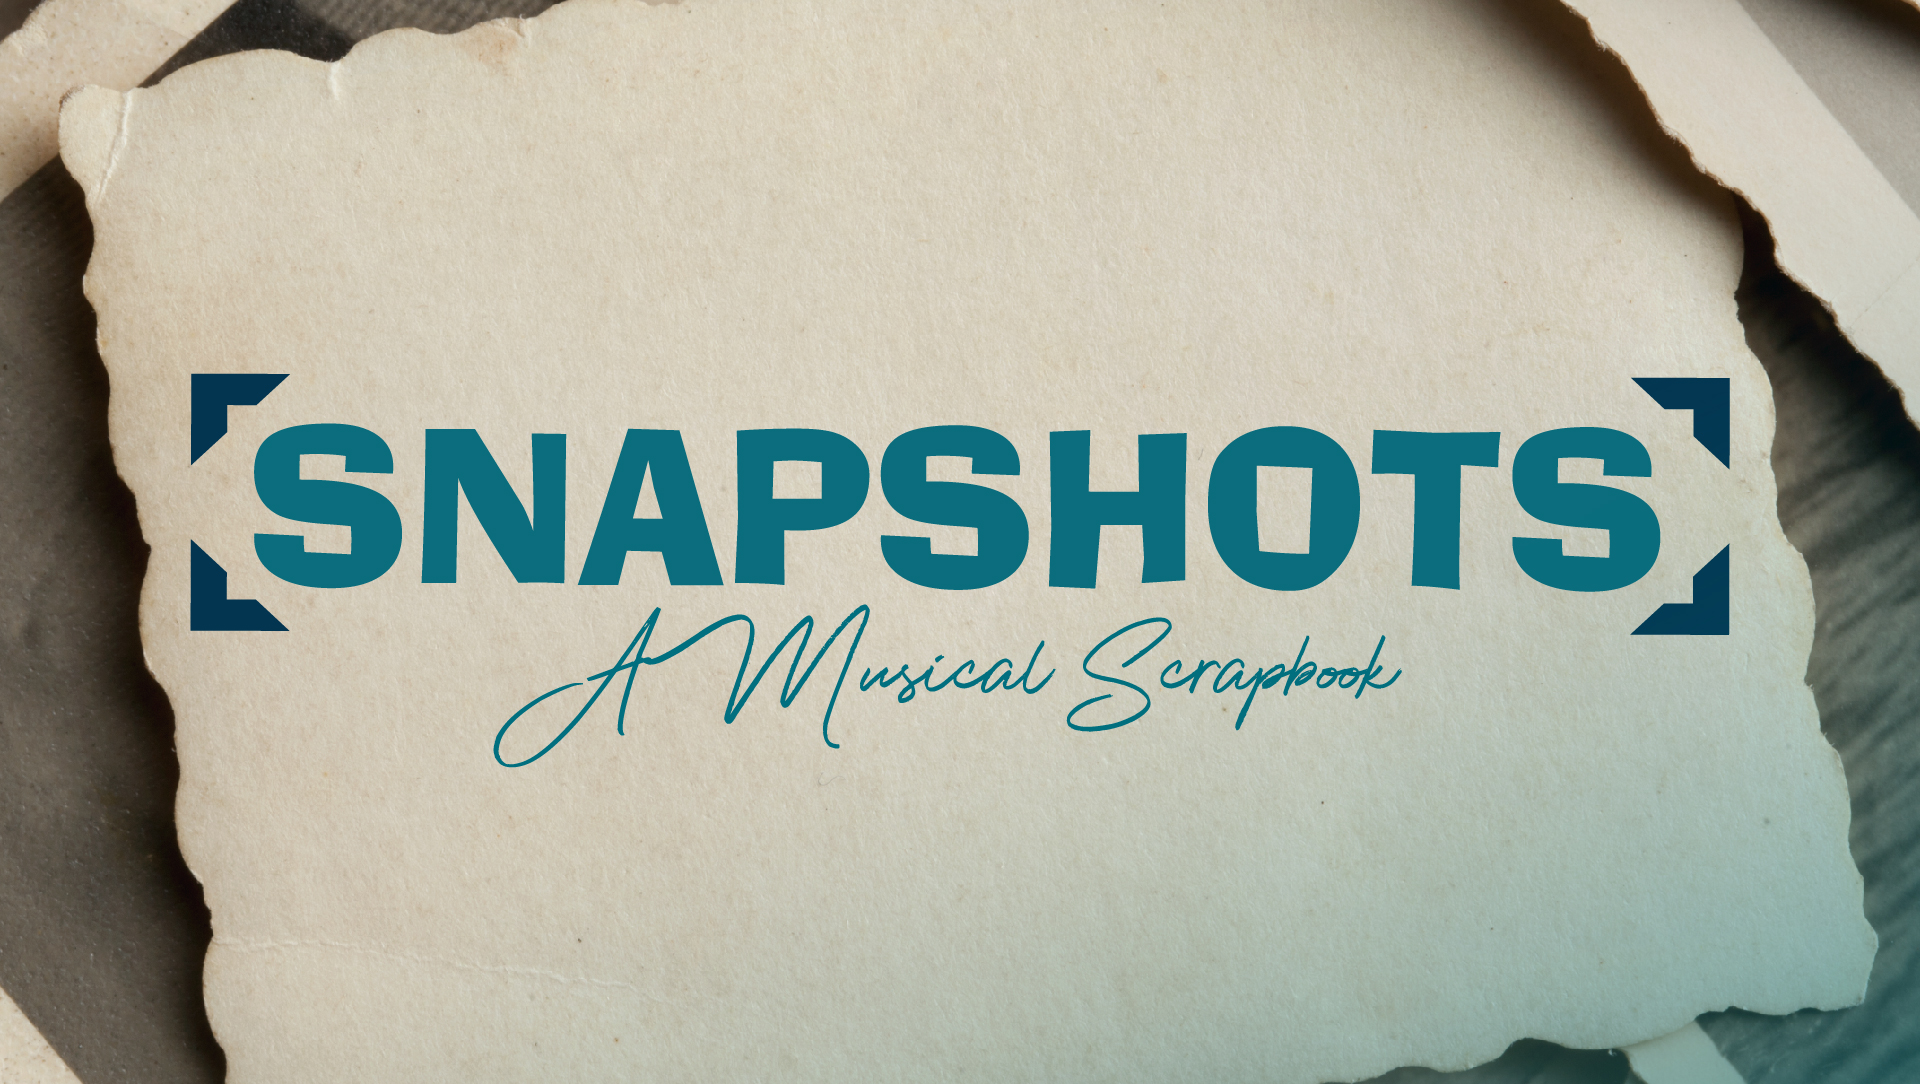 Snapshots show logo featuring teal block lettering on roughly cut-out photo paper.